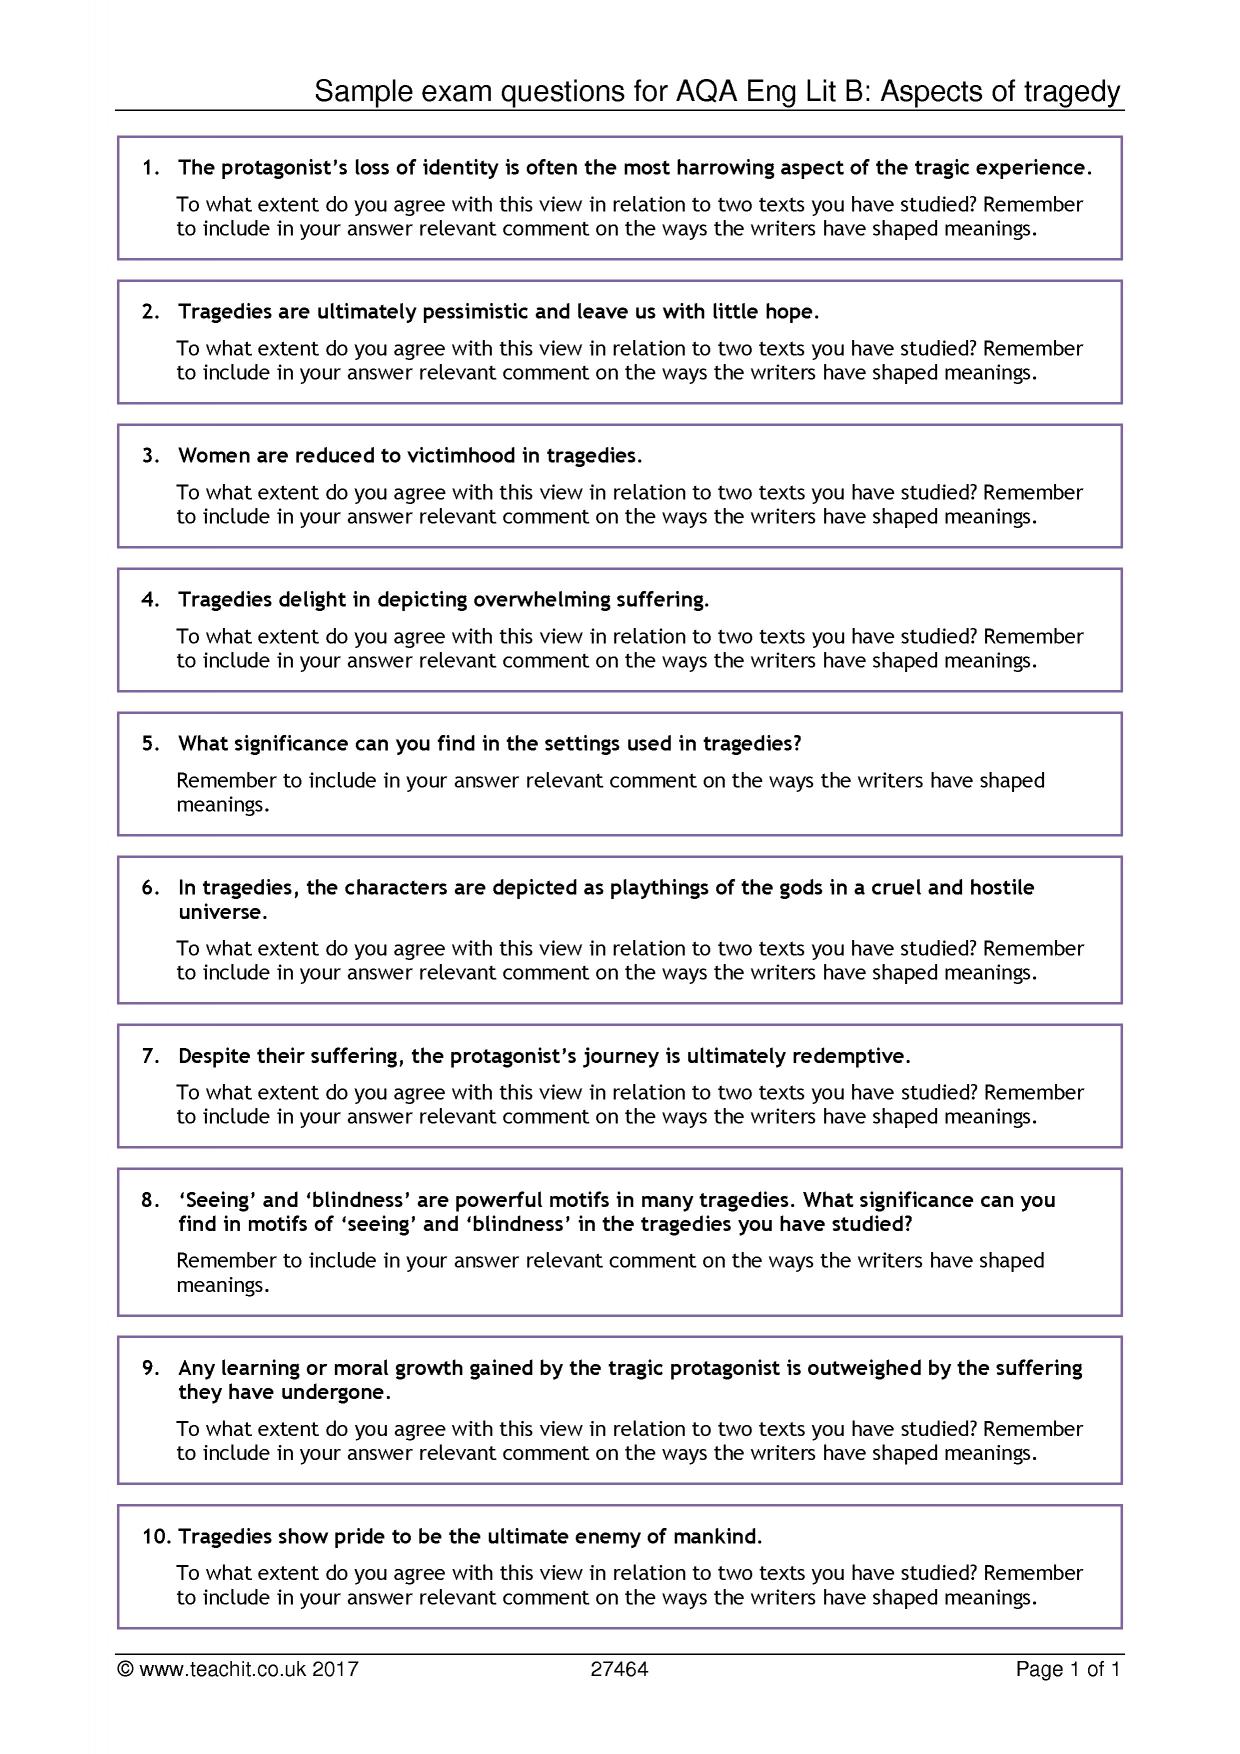 Sample exam questions for AQA Eng Lit B: Aspects of tragedy